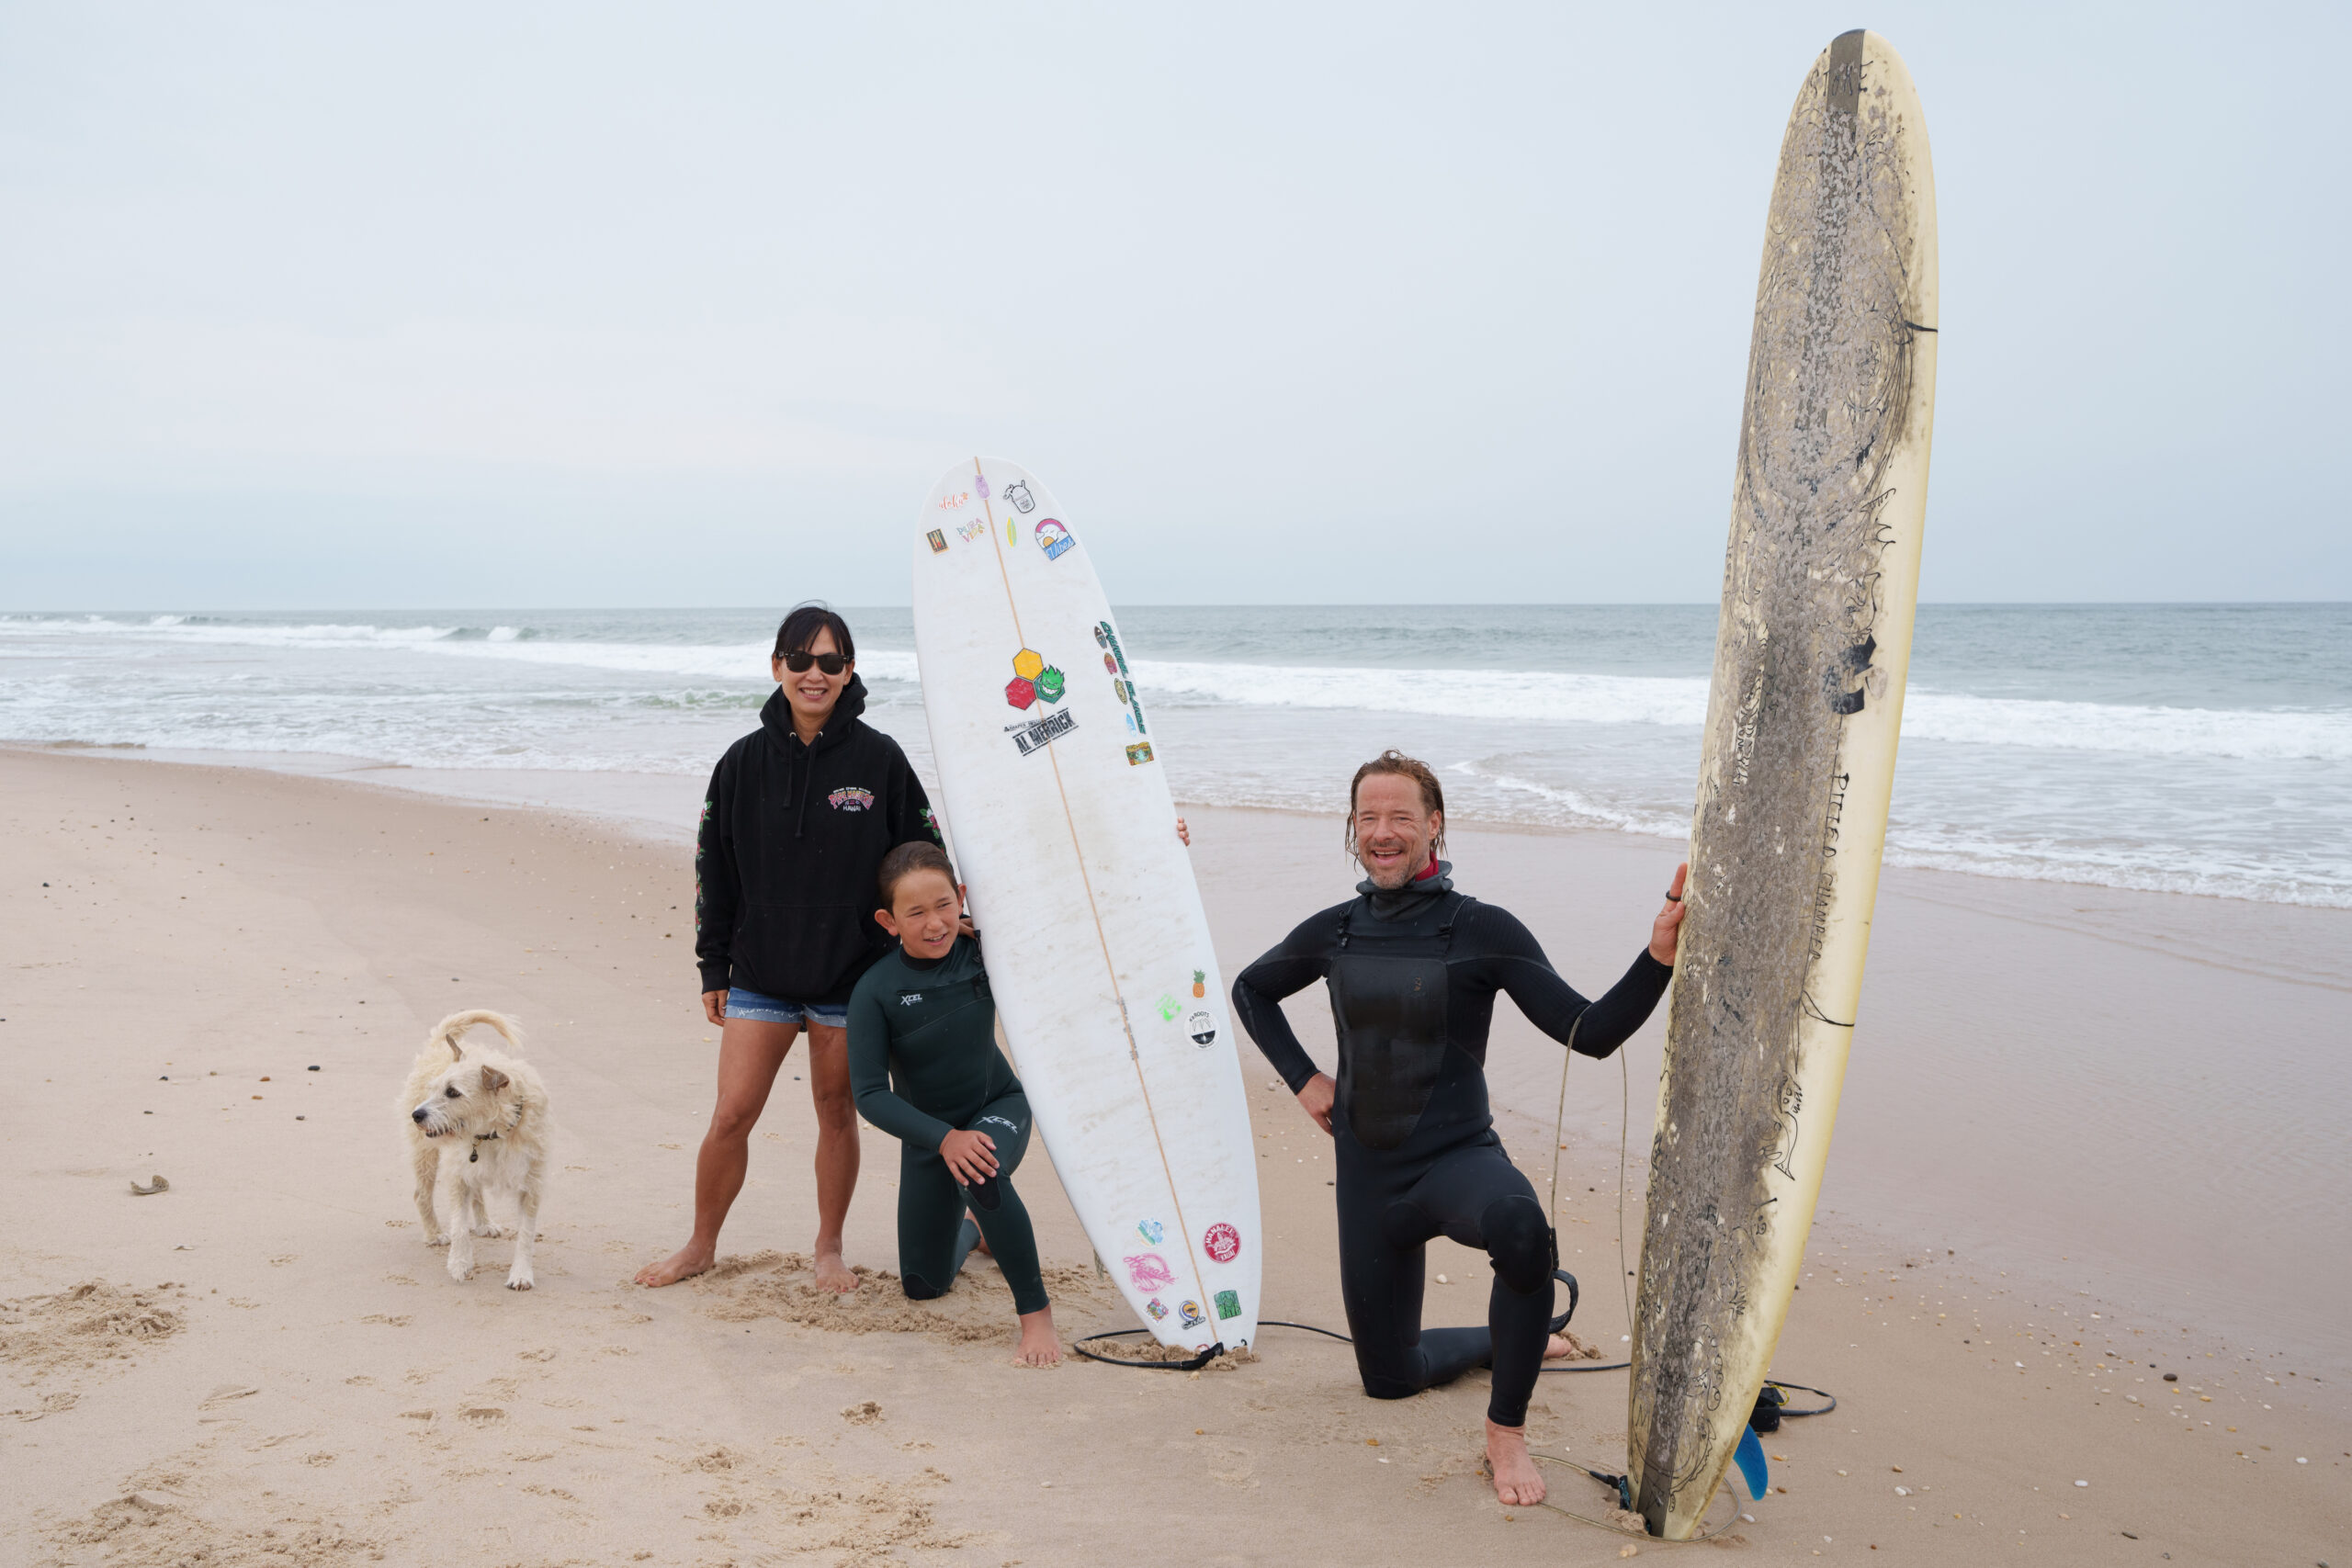 Quentin Curry with his son, Mason, and wife, Shelley Suh after as surf session.